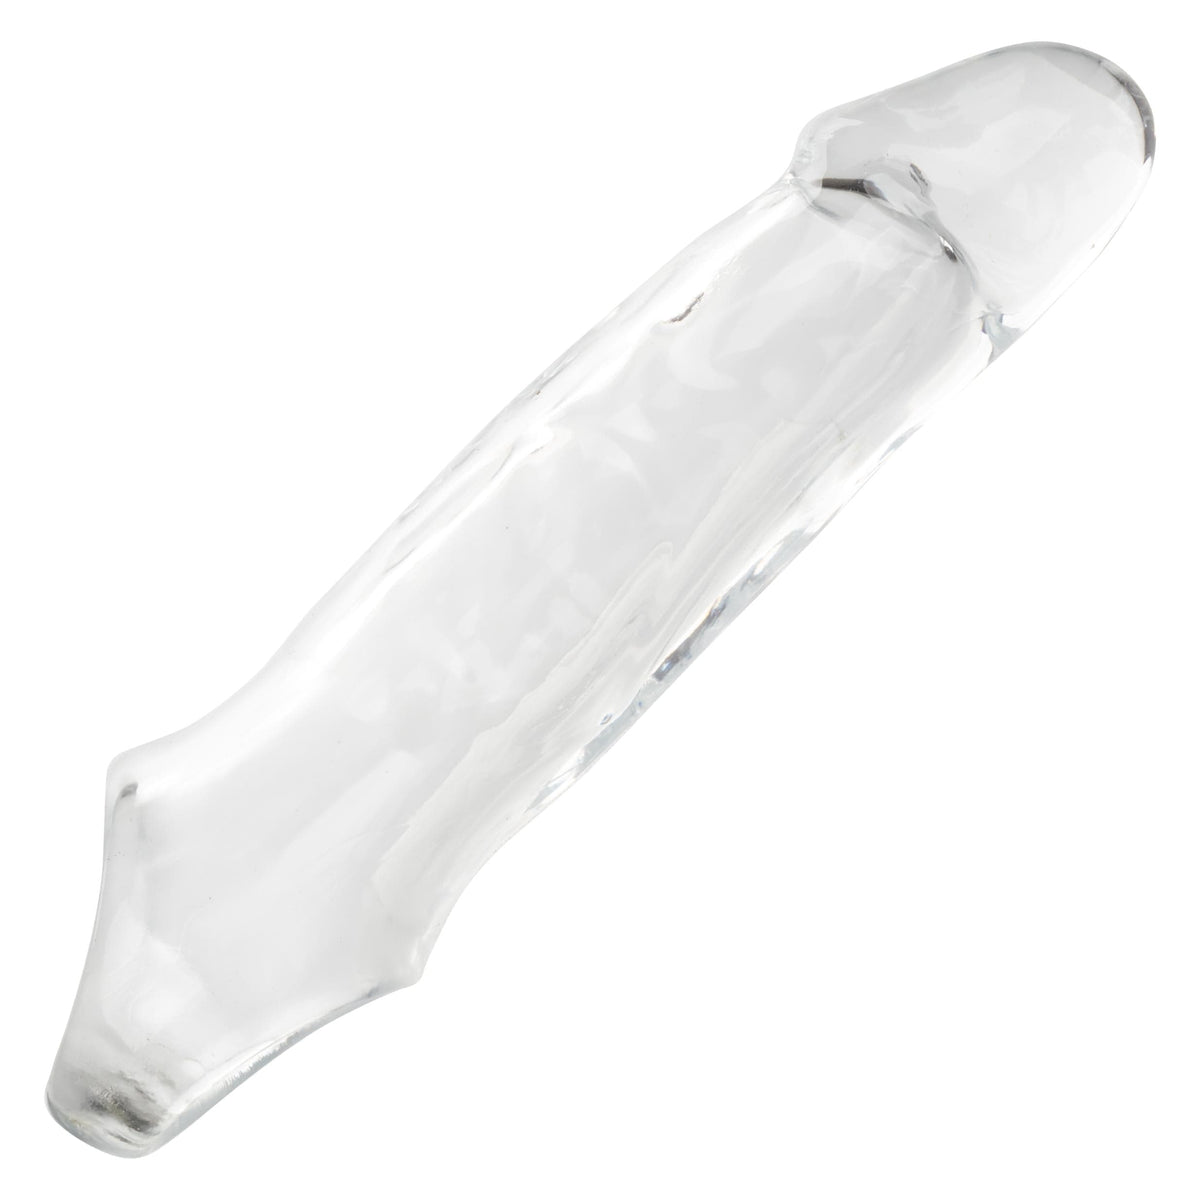 performance maxx clear extension 7 5 inch clear